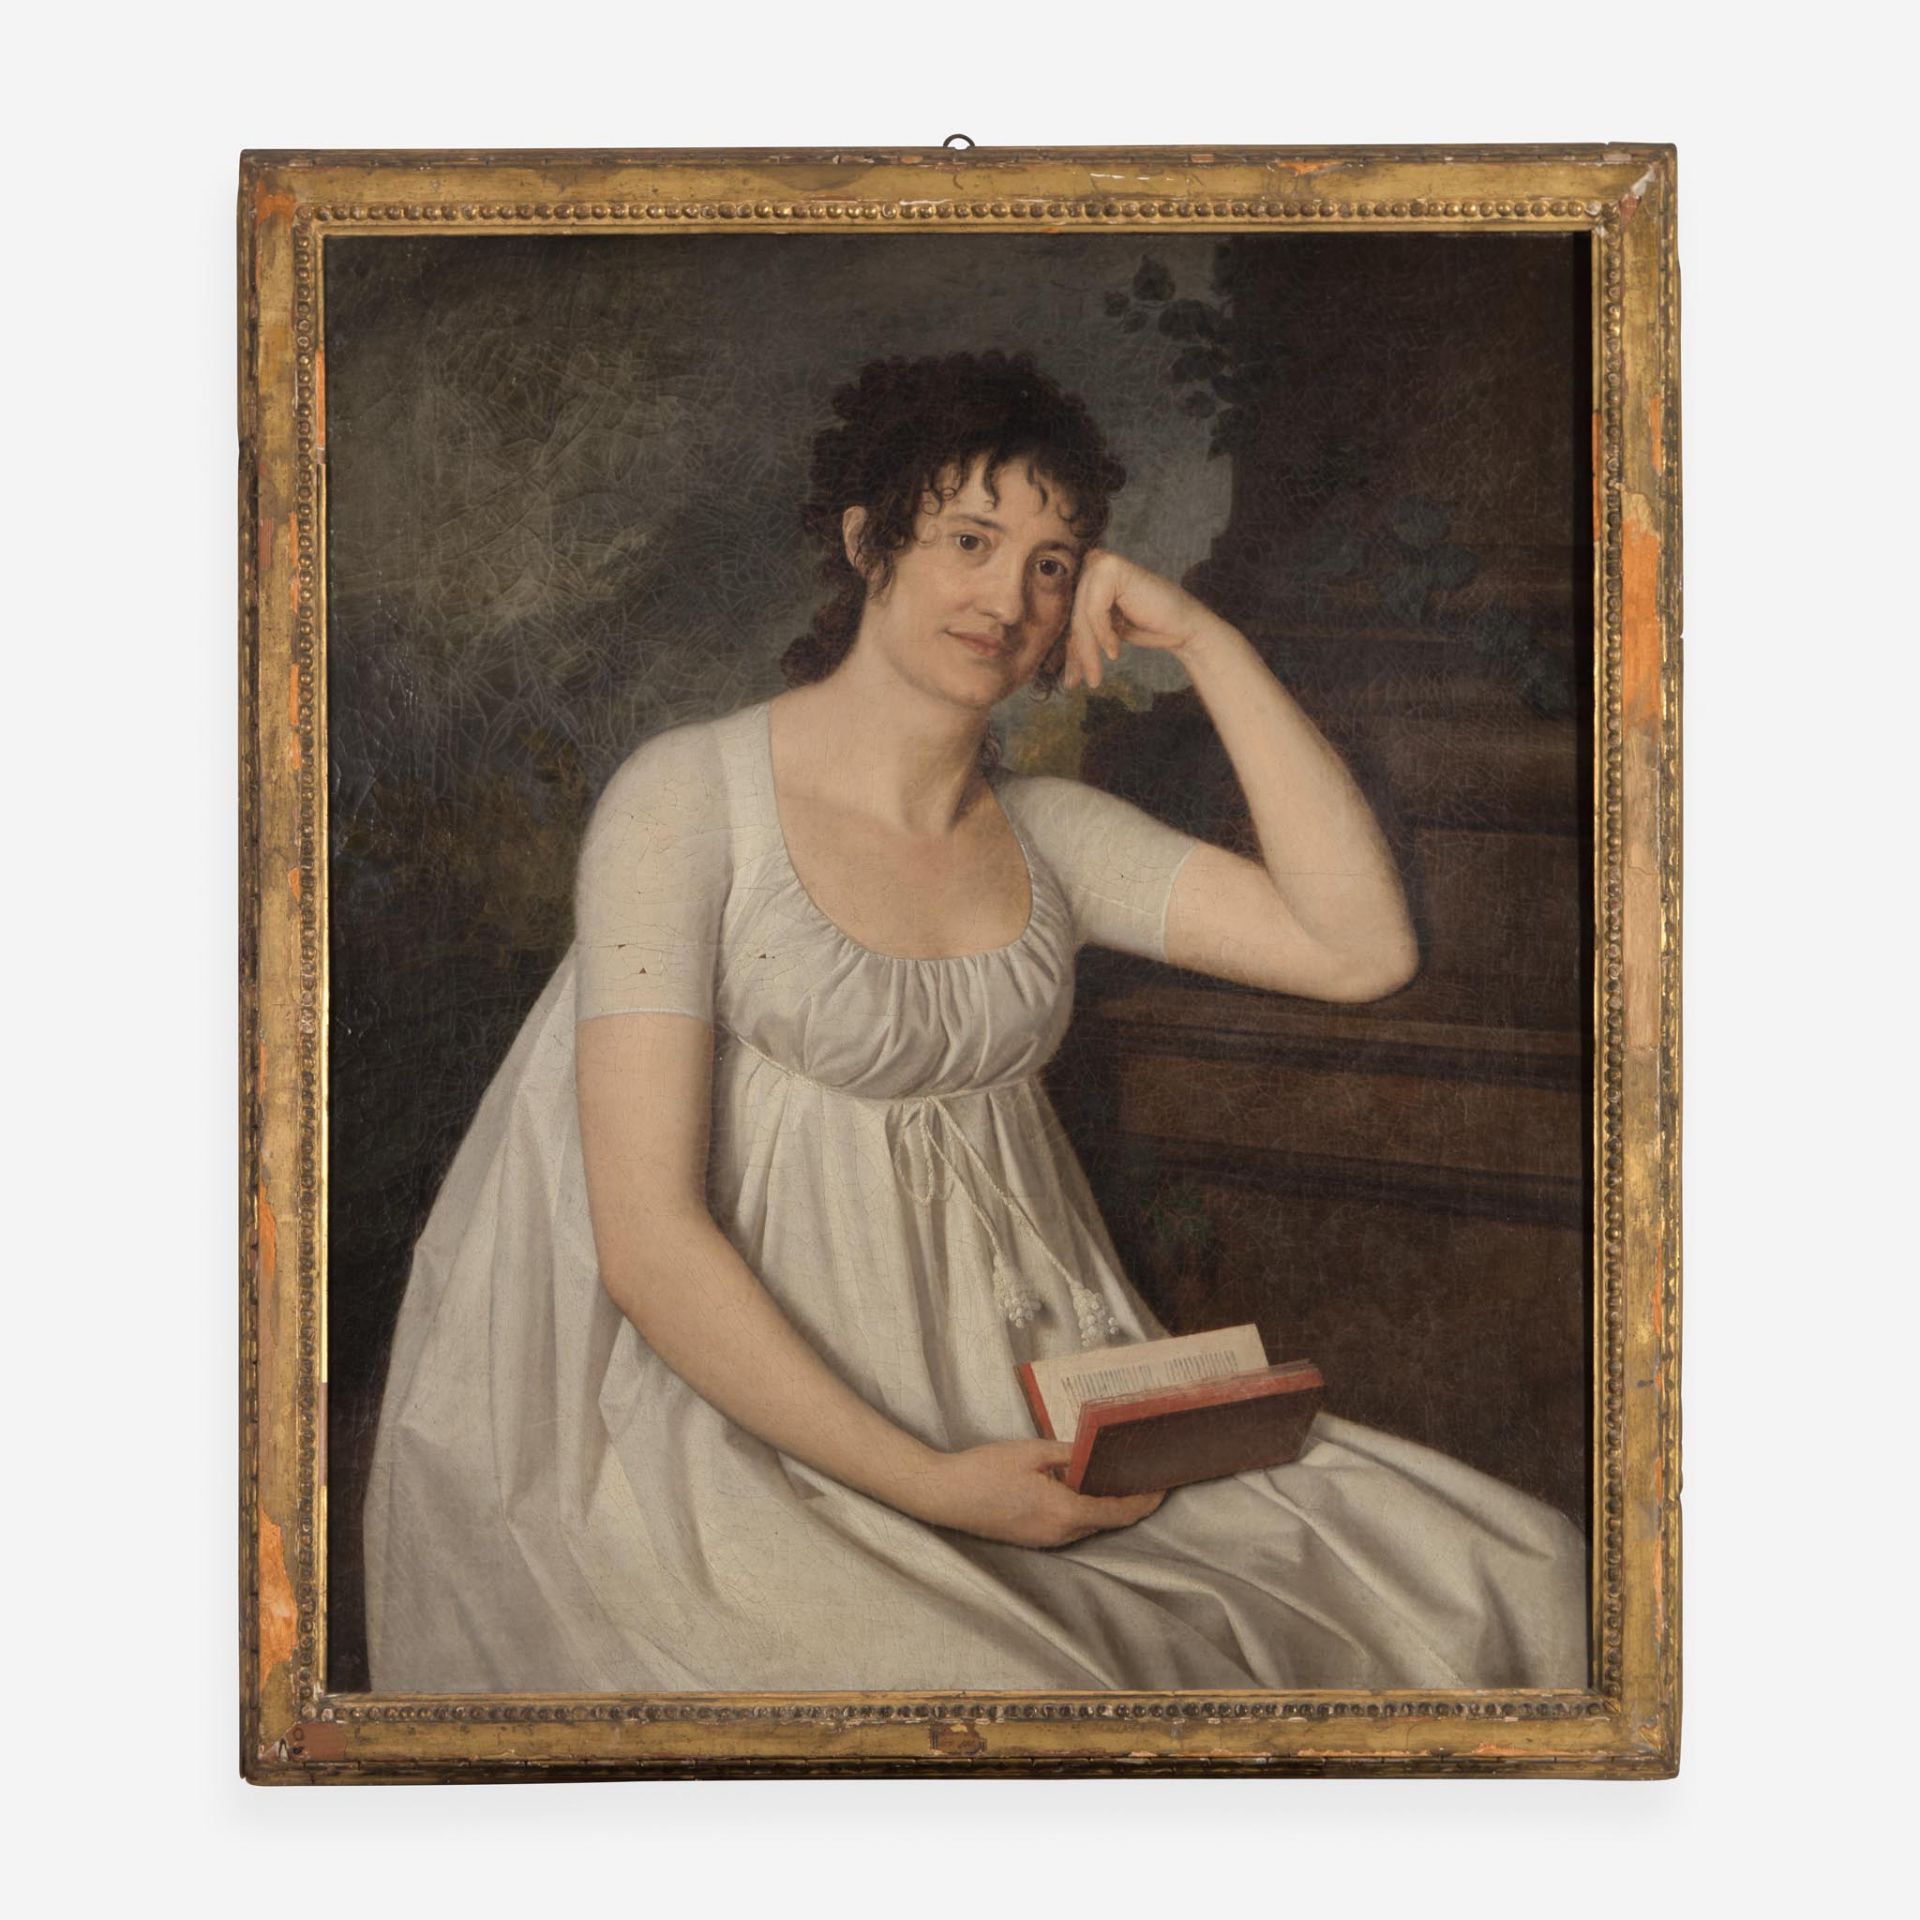 Attributed to Robert Jacques Francois Faust Lefevre (French, 1755–1830) Portrait of a Seated Lady - Image 2 of 2